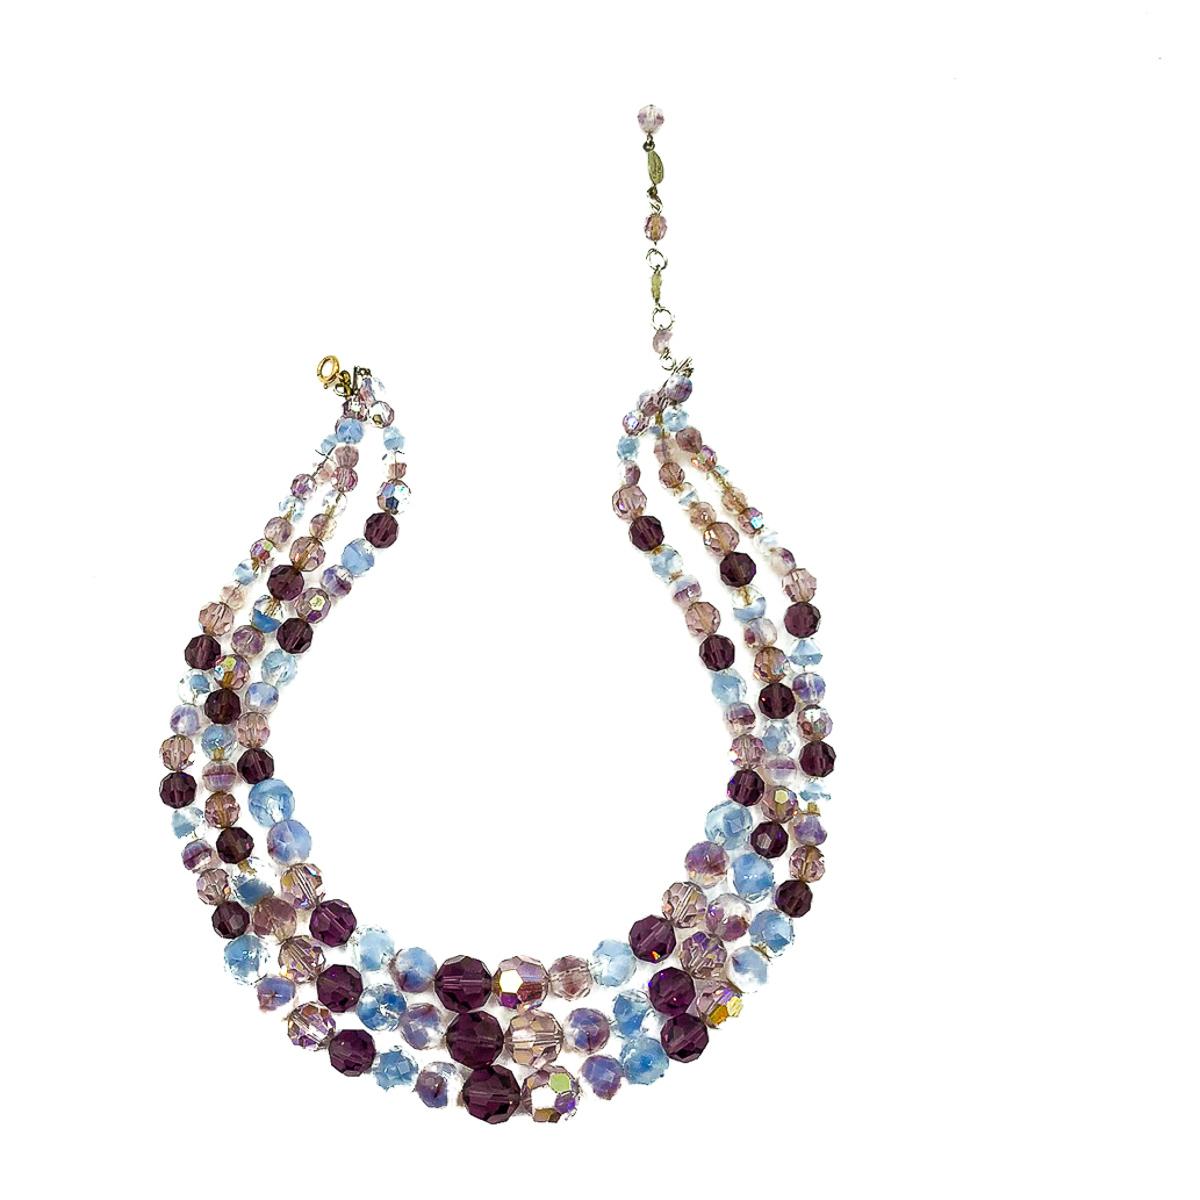 A delightful and very pretty Vintage Dior Amethyst Necklace from 1959. Crafted with faceted glass beads including amethyst glass, lilac givre glass and pink aurora borealis glass. In very good vintage condition with only a replaced bolt ring of any